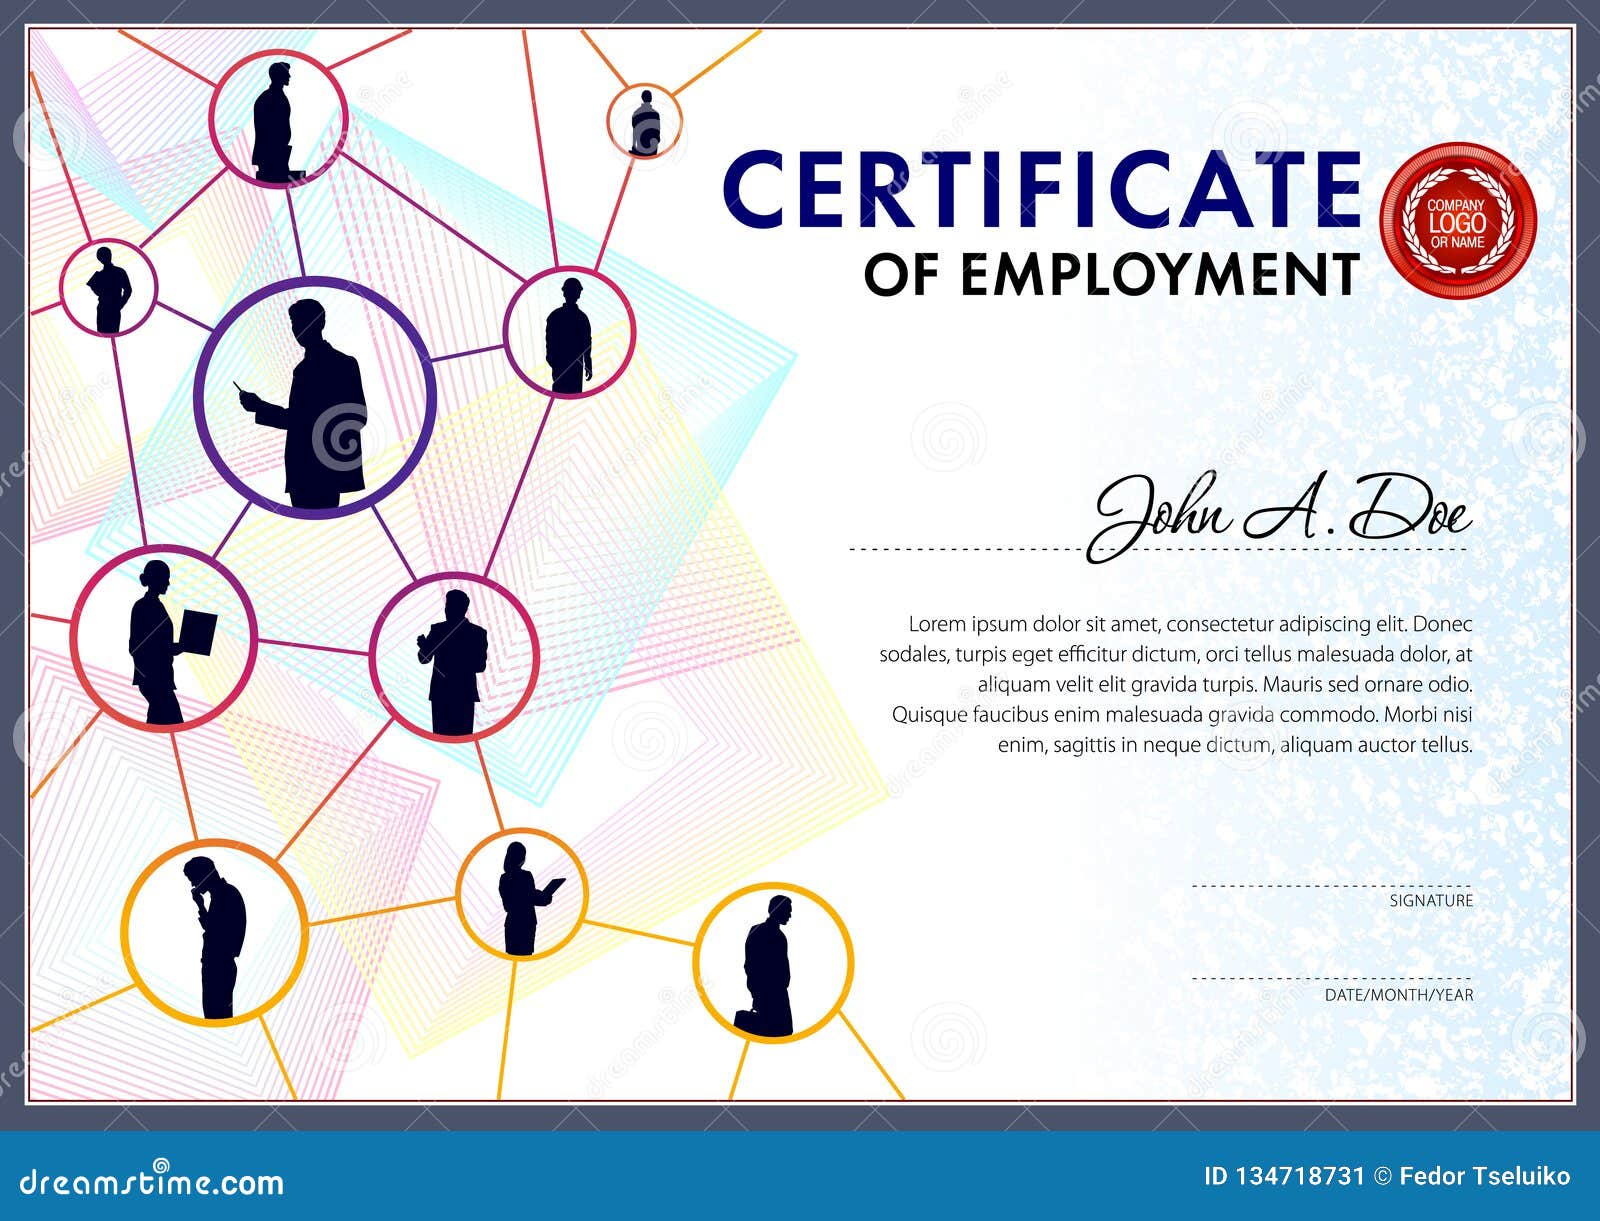 Certificate of Employment Template. Stock Vector - Illustration of For Certificate Of Employment Template